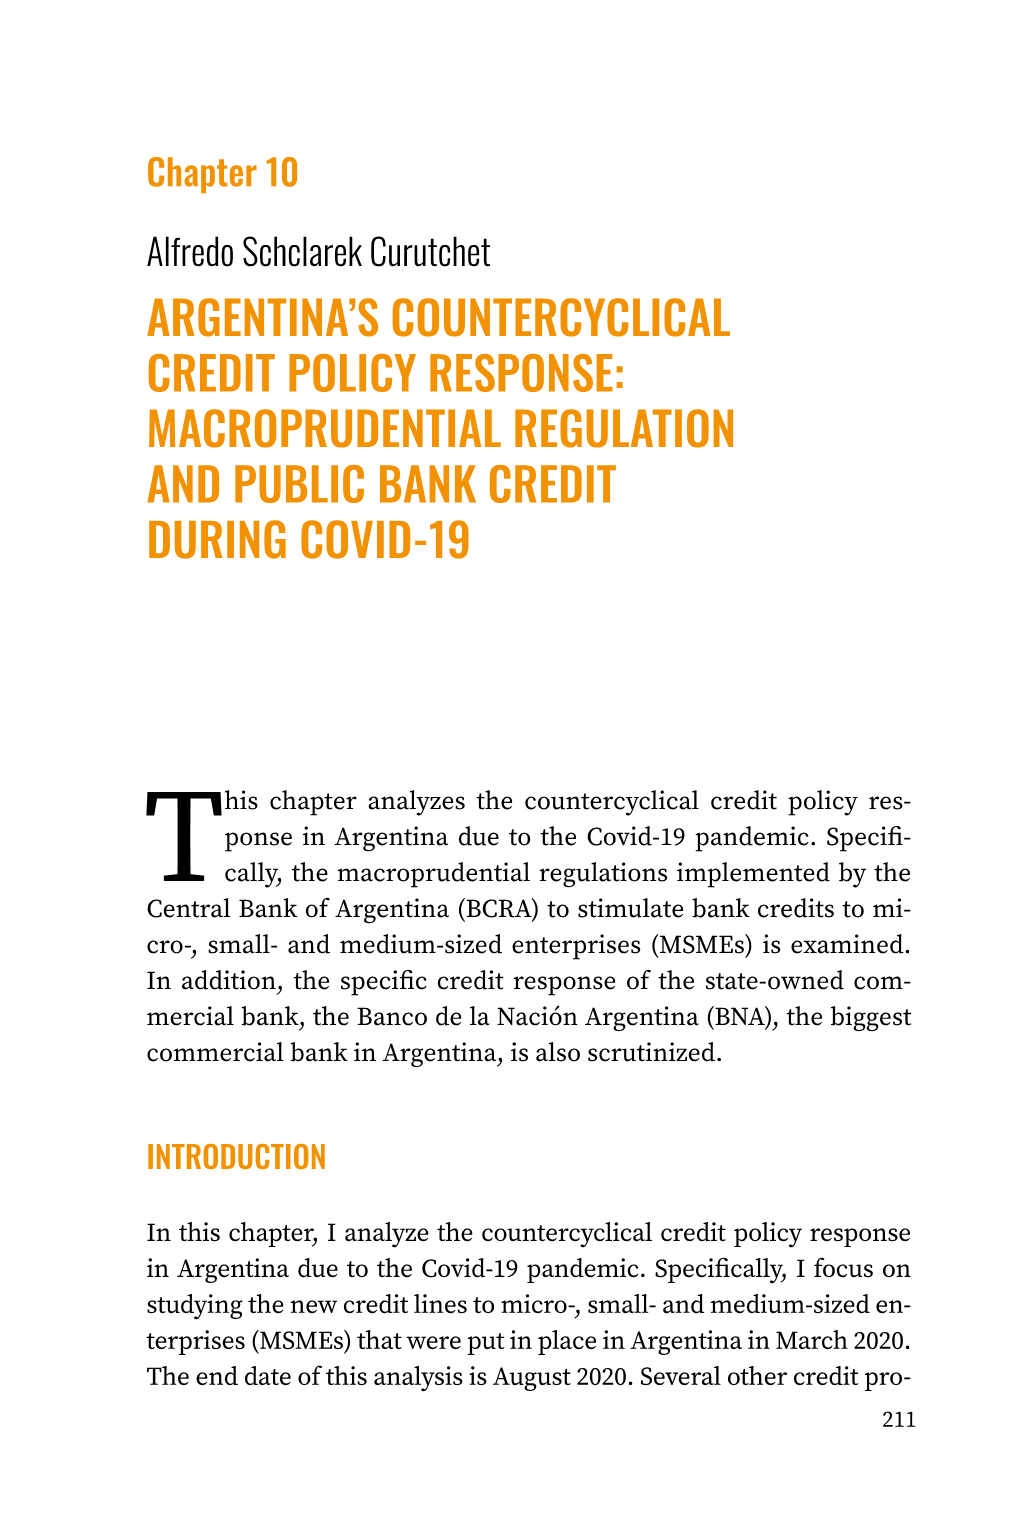 Argentina's Countercyclical Credit Policy Response: Macroprudential Regulation and Public Bank Credit During Covid-19